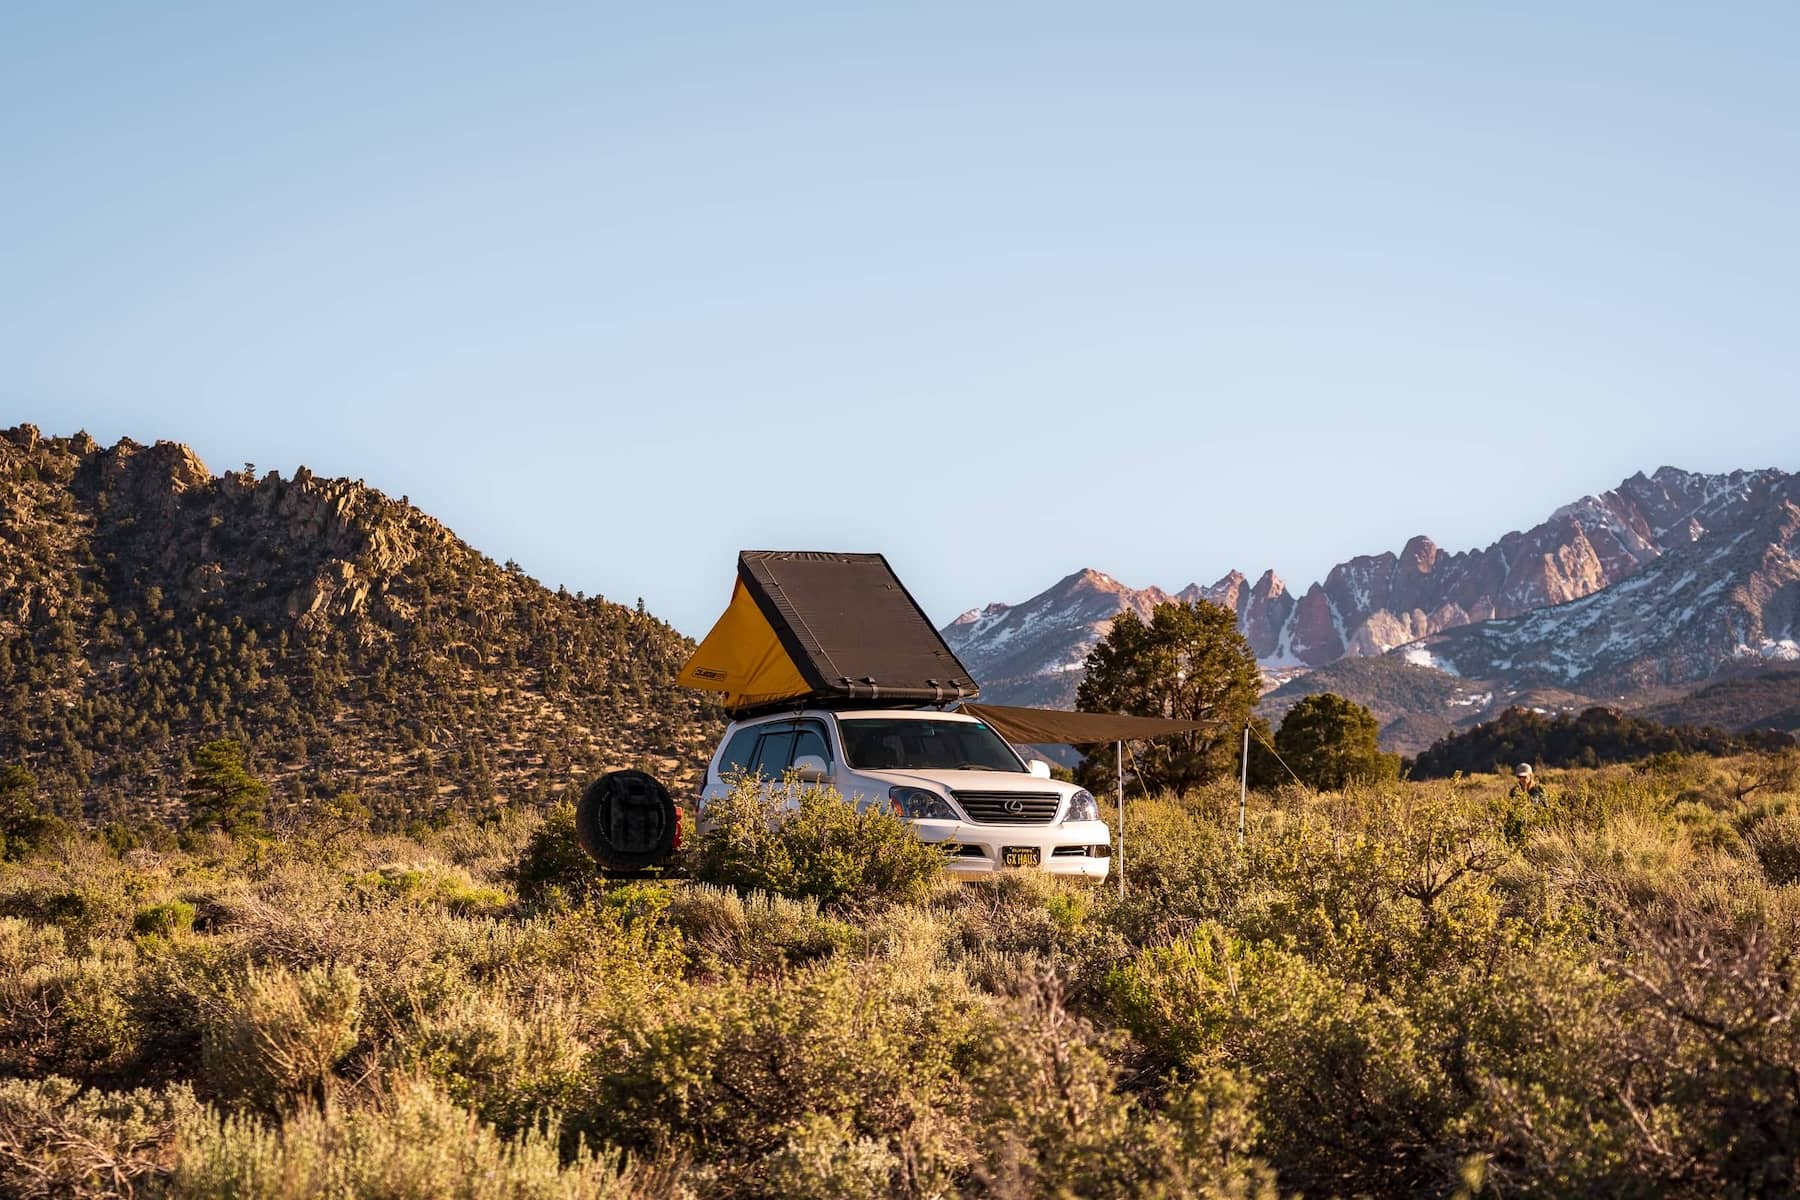 A white SUV with a rooftop tent and an awning extended sits in the middle of some low bush and desert grassland while mountains are seen in the background.